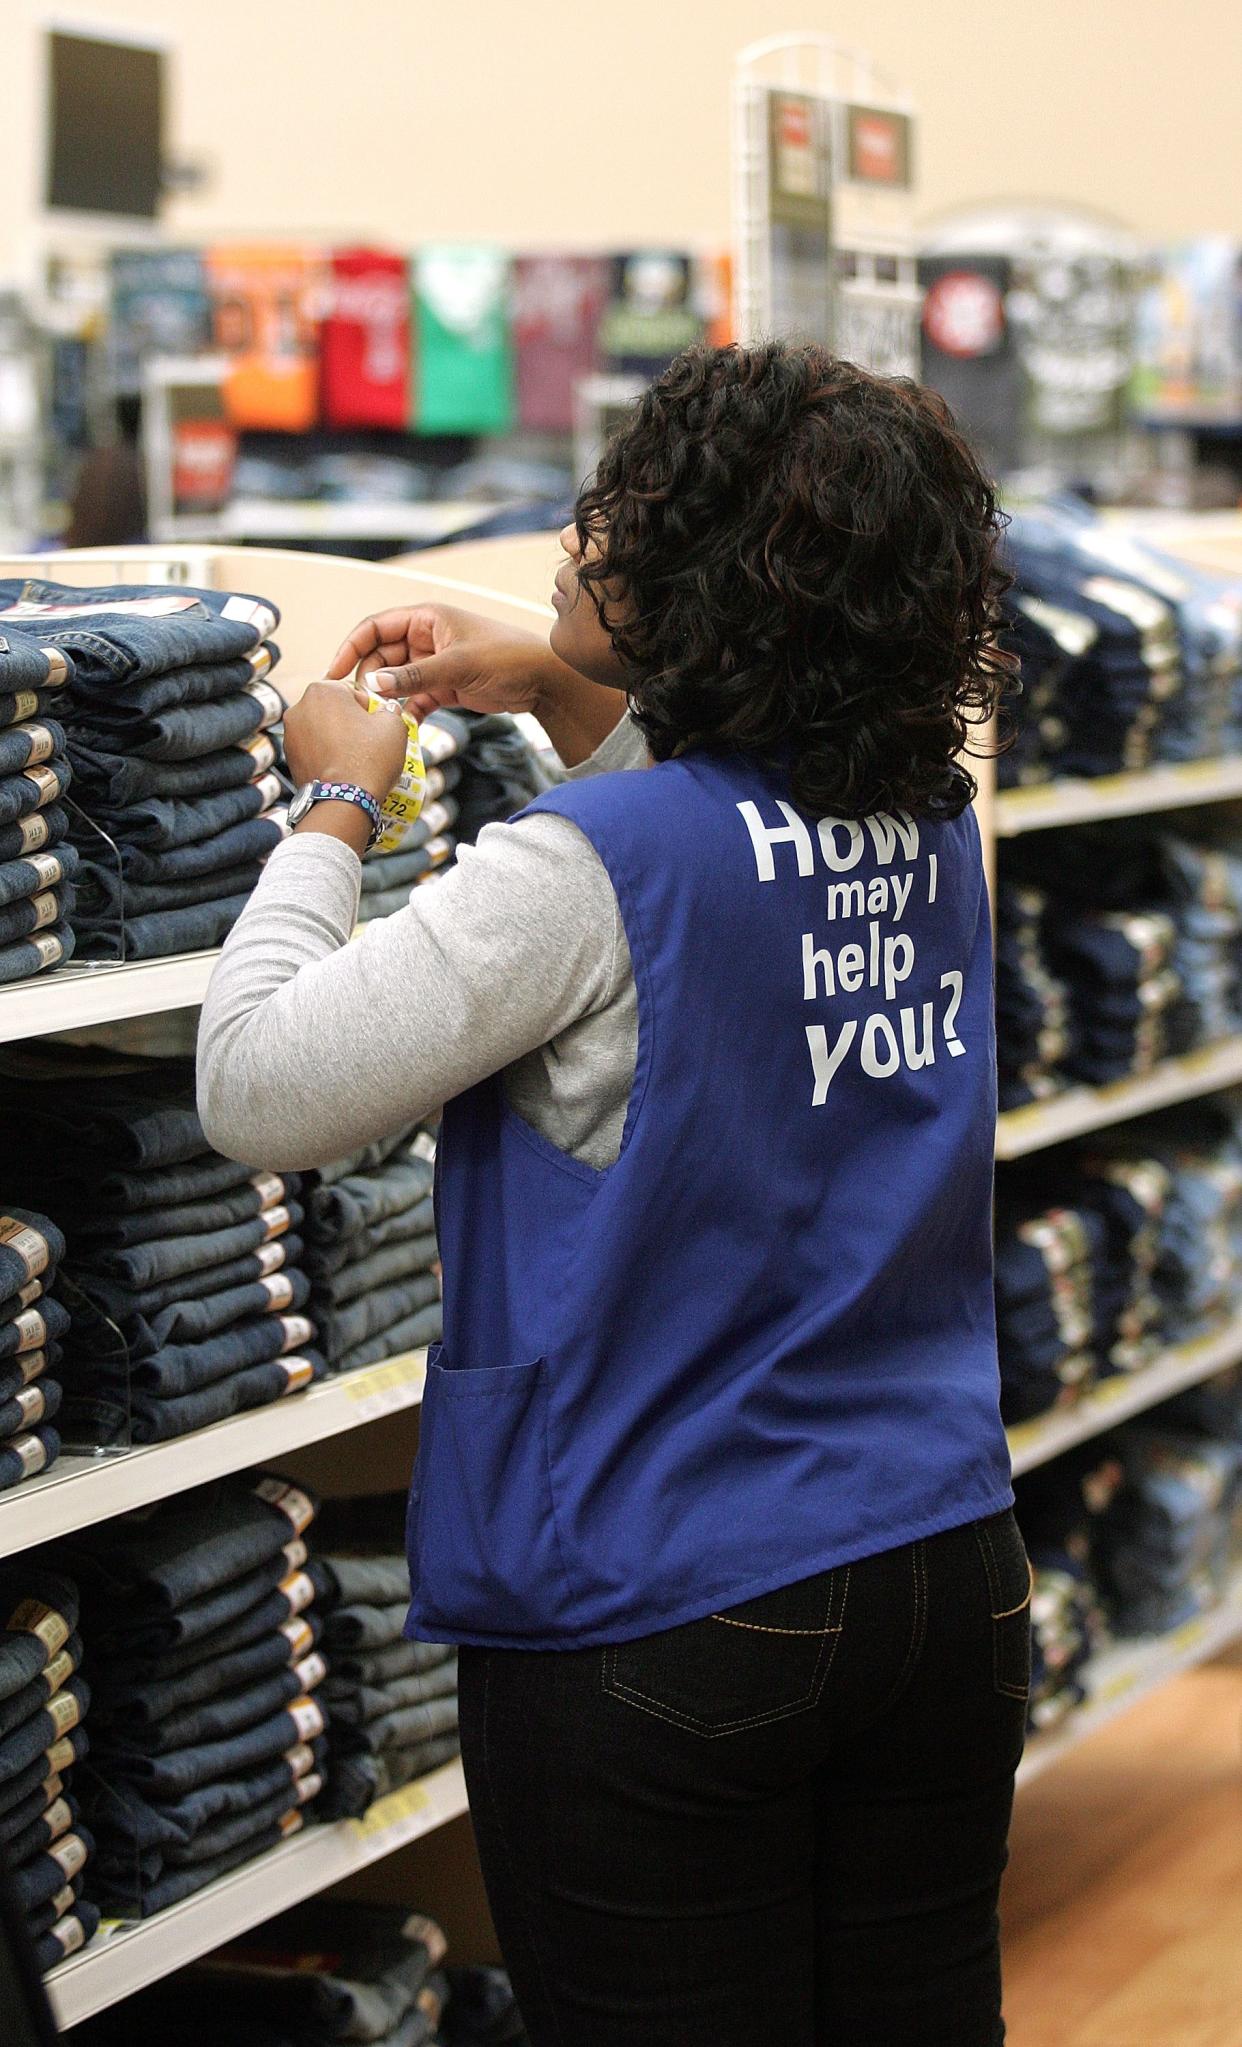 Walmart employees may soon be able to wear jeans to work. (Photo by Tim Boyle/Getty Images)